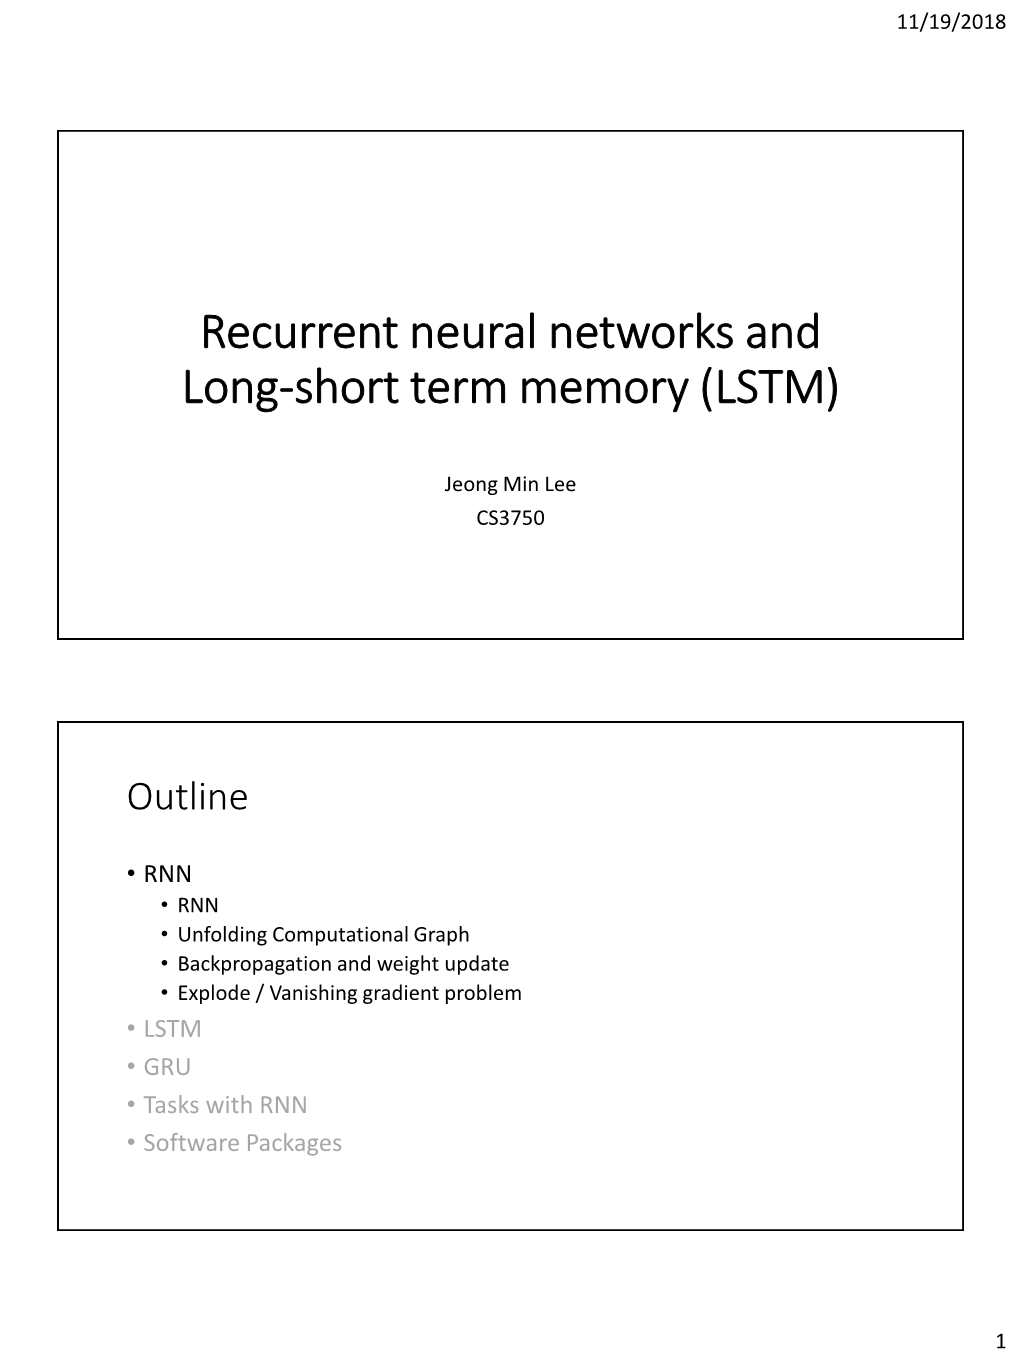 Recurrent Neural Networks and Long-Short Term Memory (LSTM)